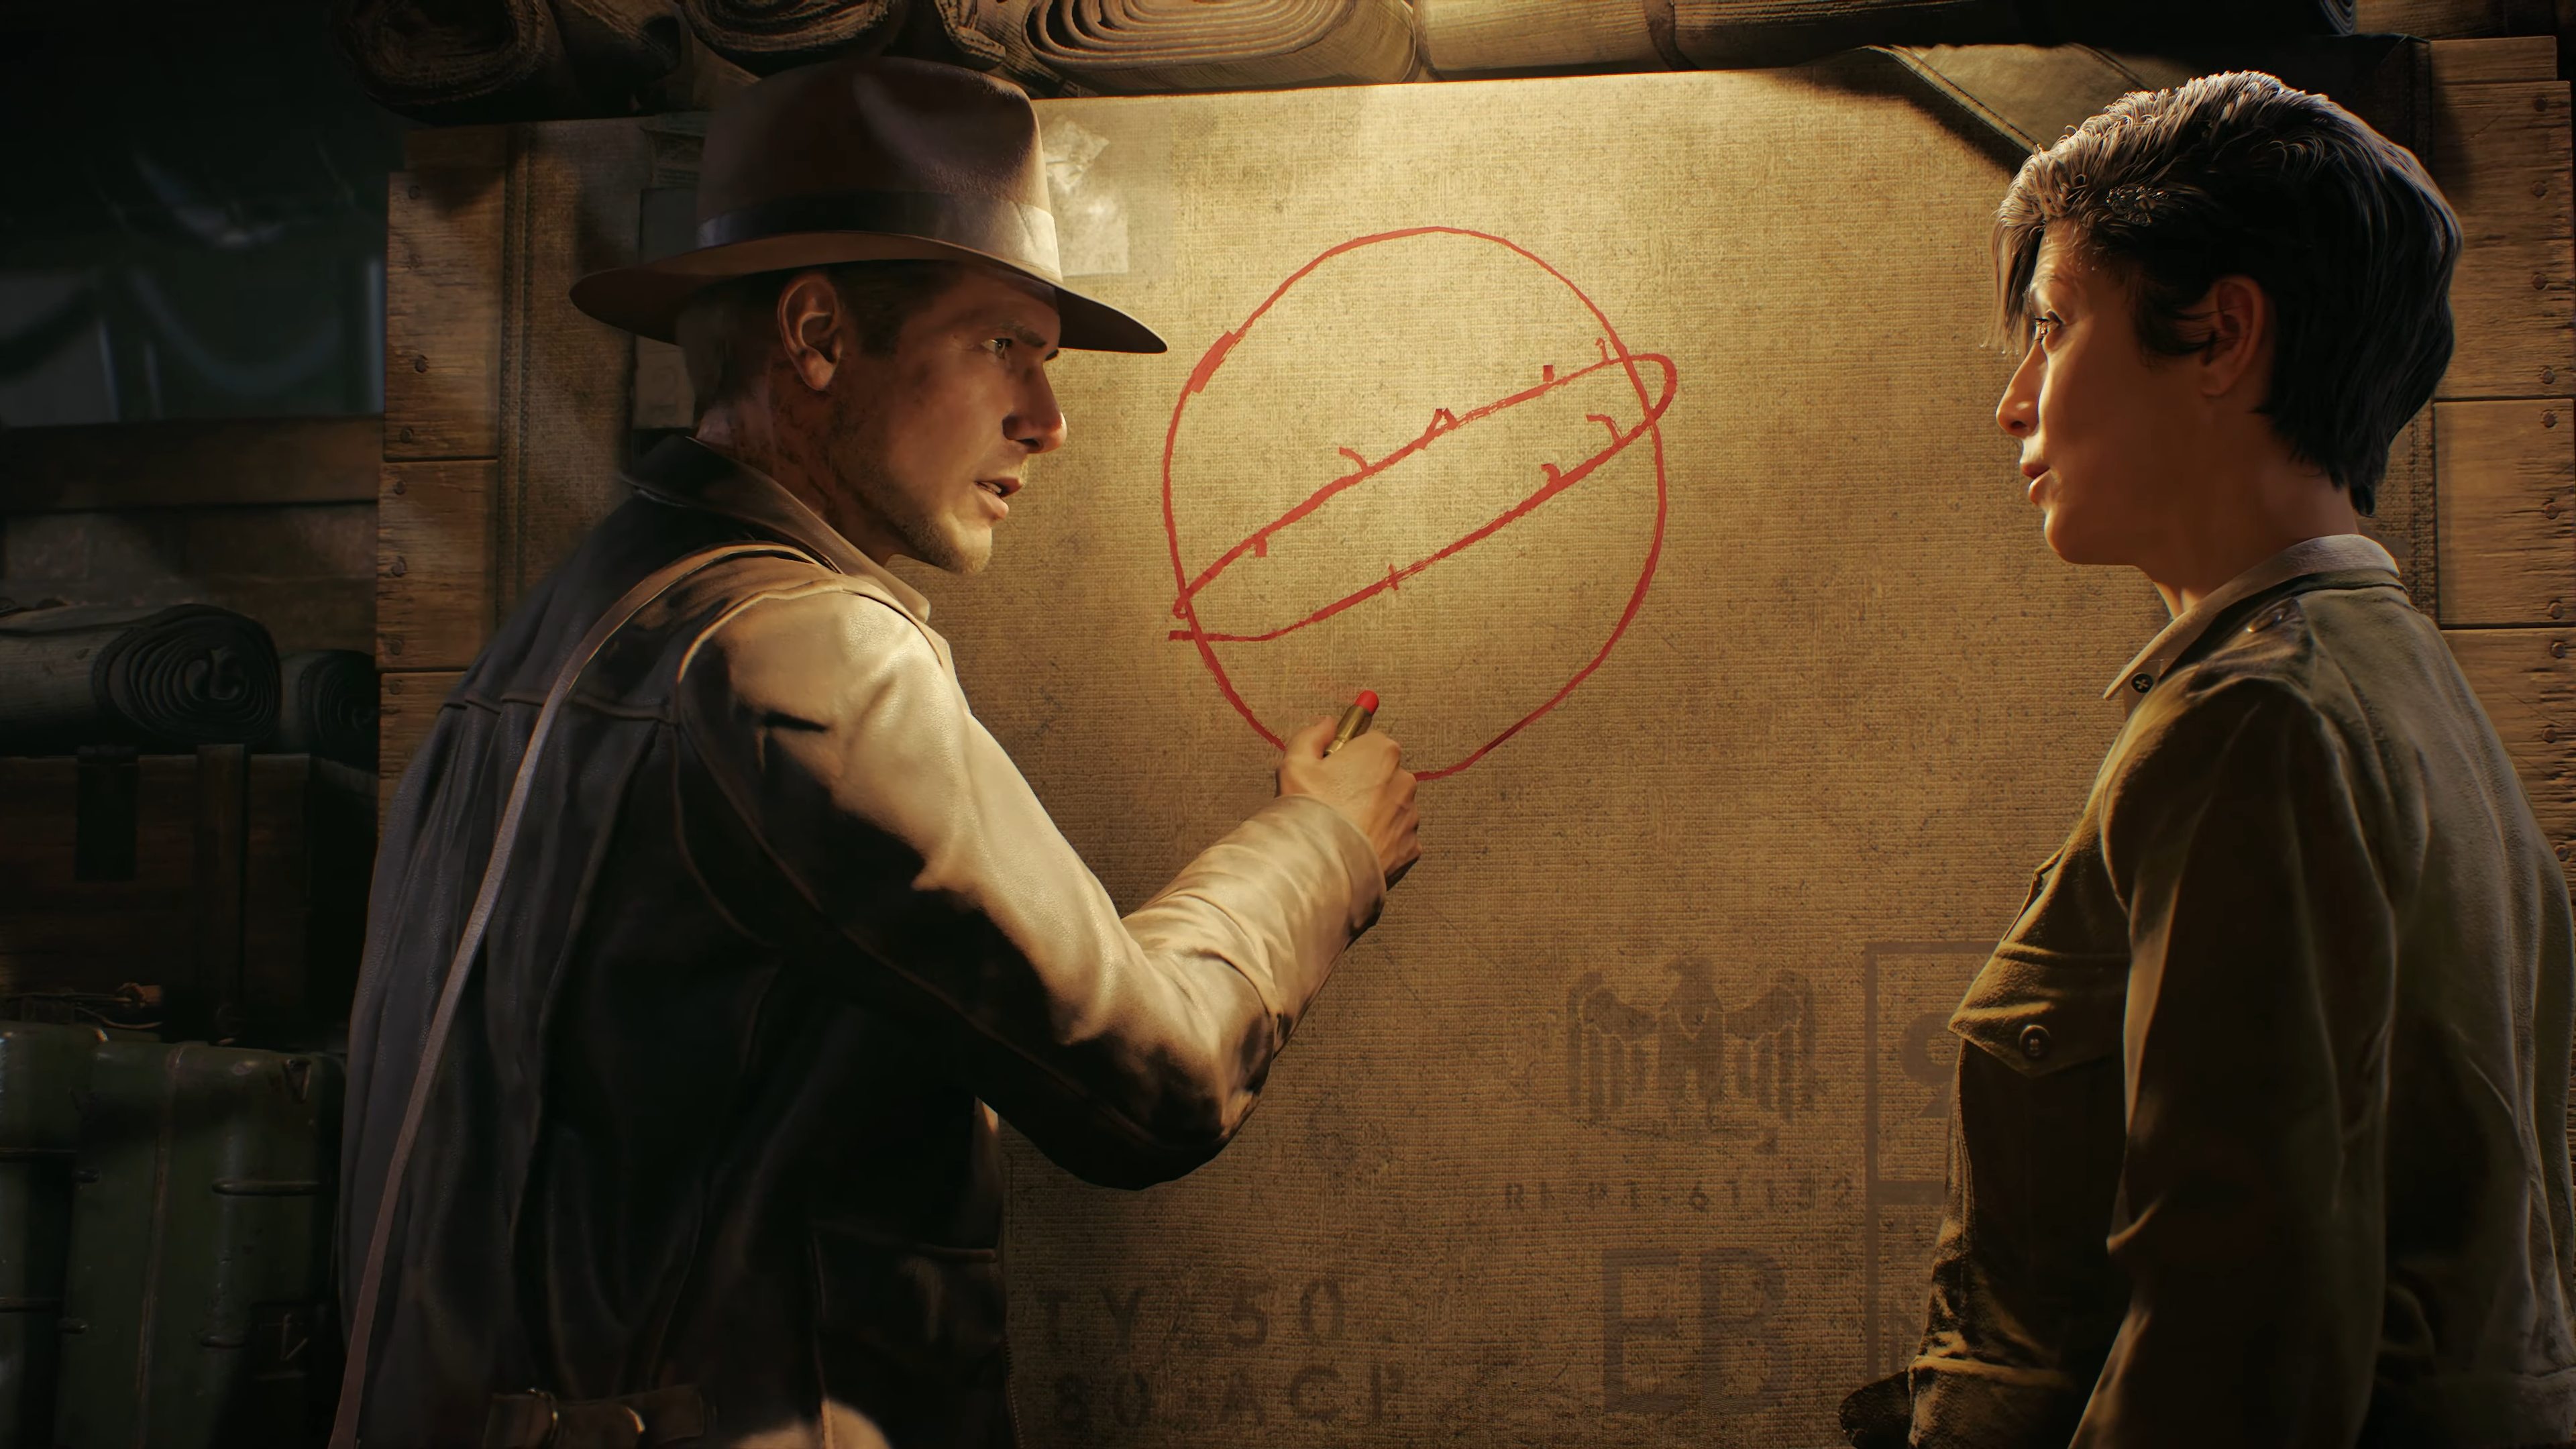 New Indiana Jones Game Reveals First-Ever Gameplay